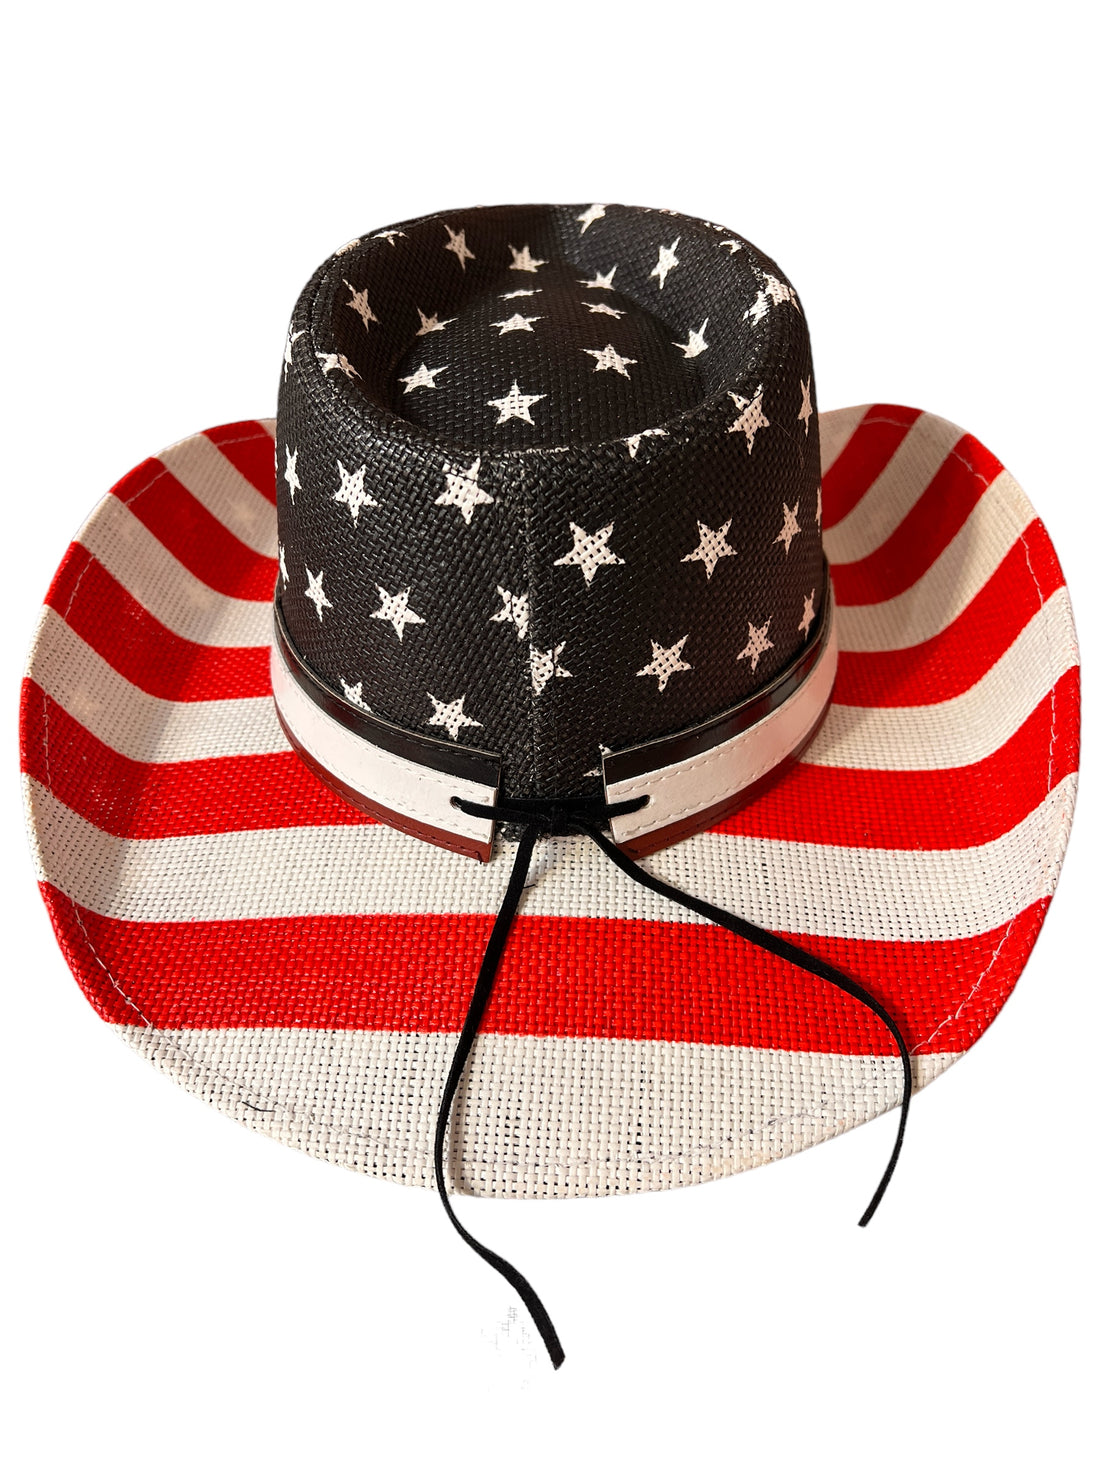  Image of the C.C. Beanie American Flag Cowboy Hat, showcasing the stars and stripes design, perfect for adding a patriotic touch to any outfit.